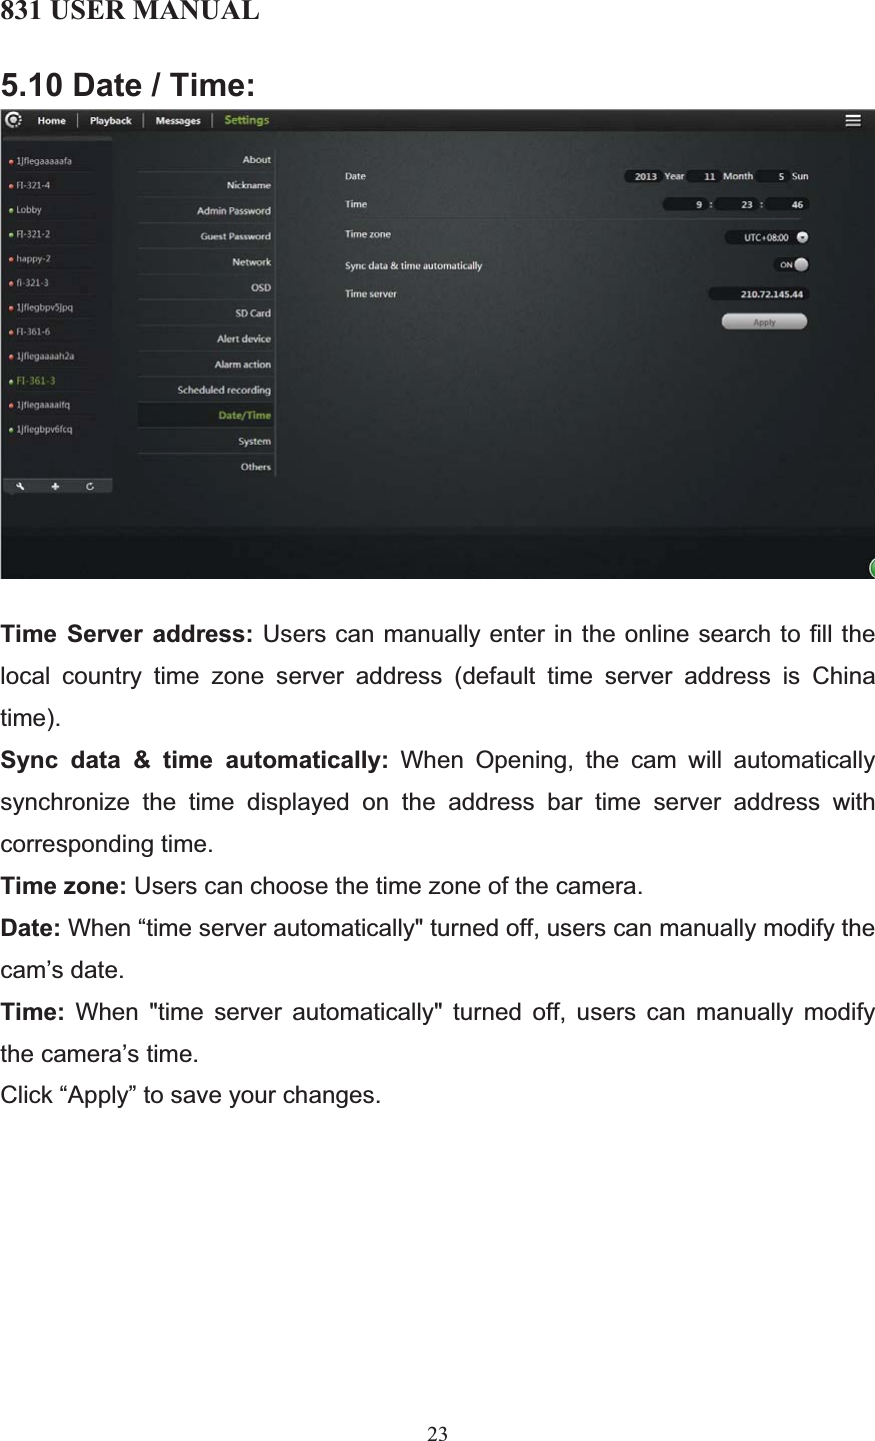 831 USER MANUAL 23 5.10 Date / Time: Time Server address: Users can manually enter in the online search to fill the local country time zone server address (default time server address is China time). Sync data &amp; time automatically: When Opening, the cam will automatically synchronize the time displayed on the address bar time server address with corresponding time. Time zone: Users can choose the time zone of the camera. Date: When “time server automatically&quot; turned off, users can manually modify the cam’s date. Time: When &quot;time server automatically&quot; turned off, users can manually modify the camera’s time. Click “Apply” to save your changes. 